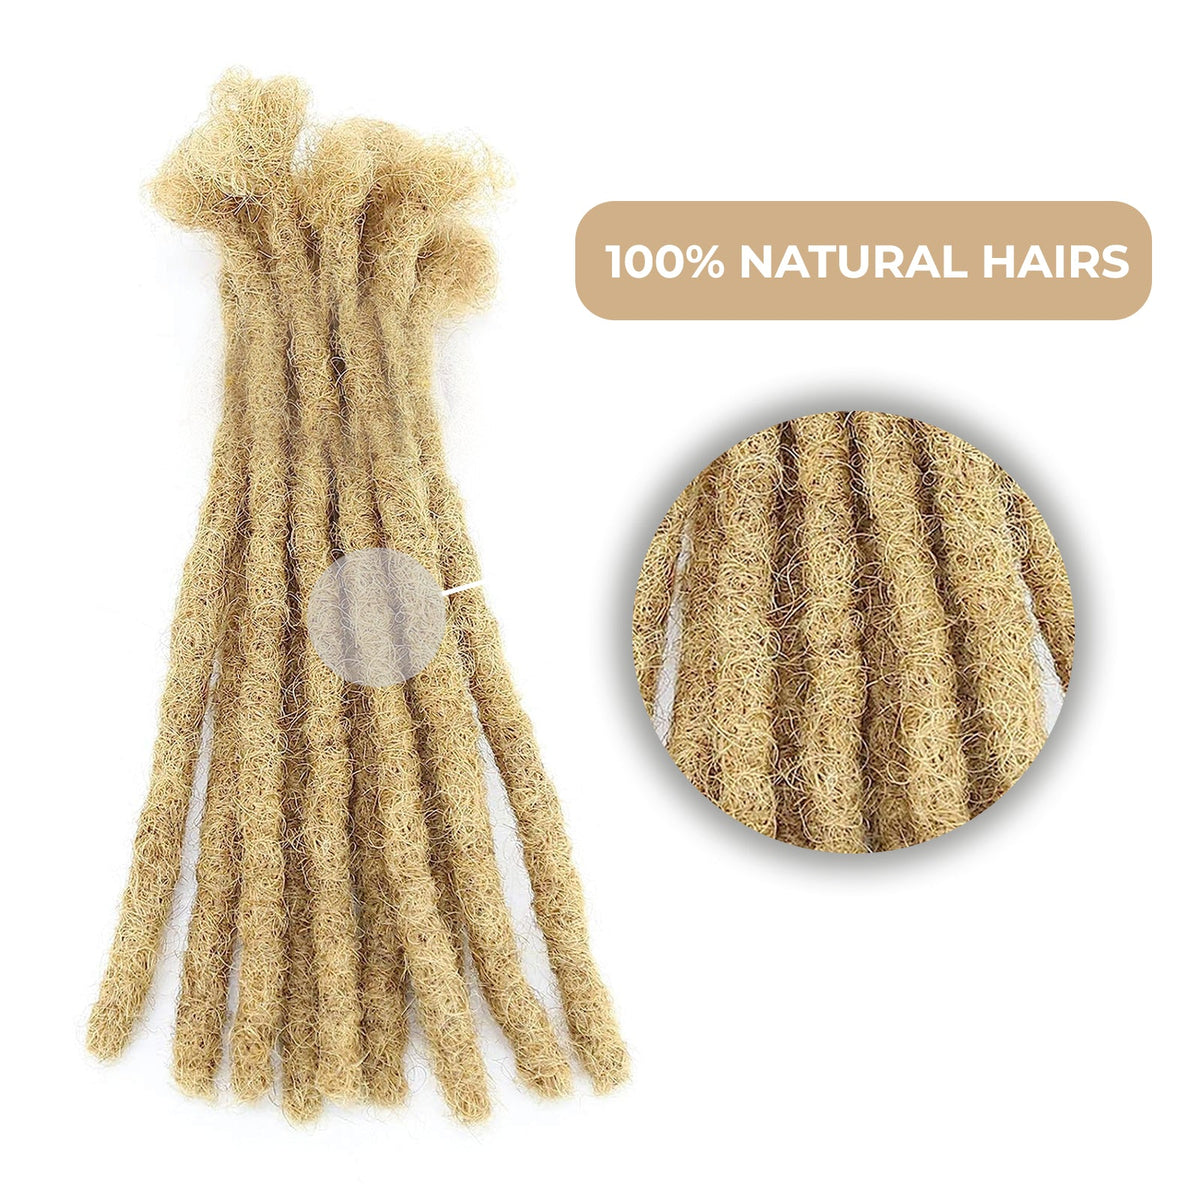 100% Human Hair Blonde Dreadlock Extensions 8Inch 10 Strands Handmade Natural Loc Extensions Human Hair Bundle Dreads Extensions For Woman & Men Can be Dyed (27/Honey Blonde 8inch length 0.4cm Width)